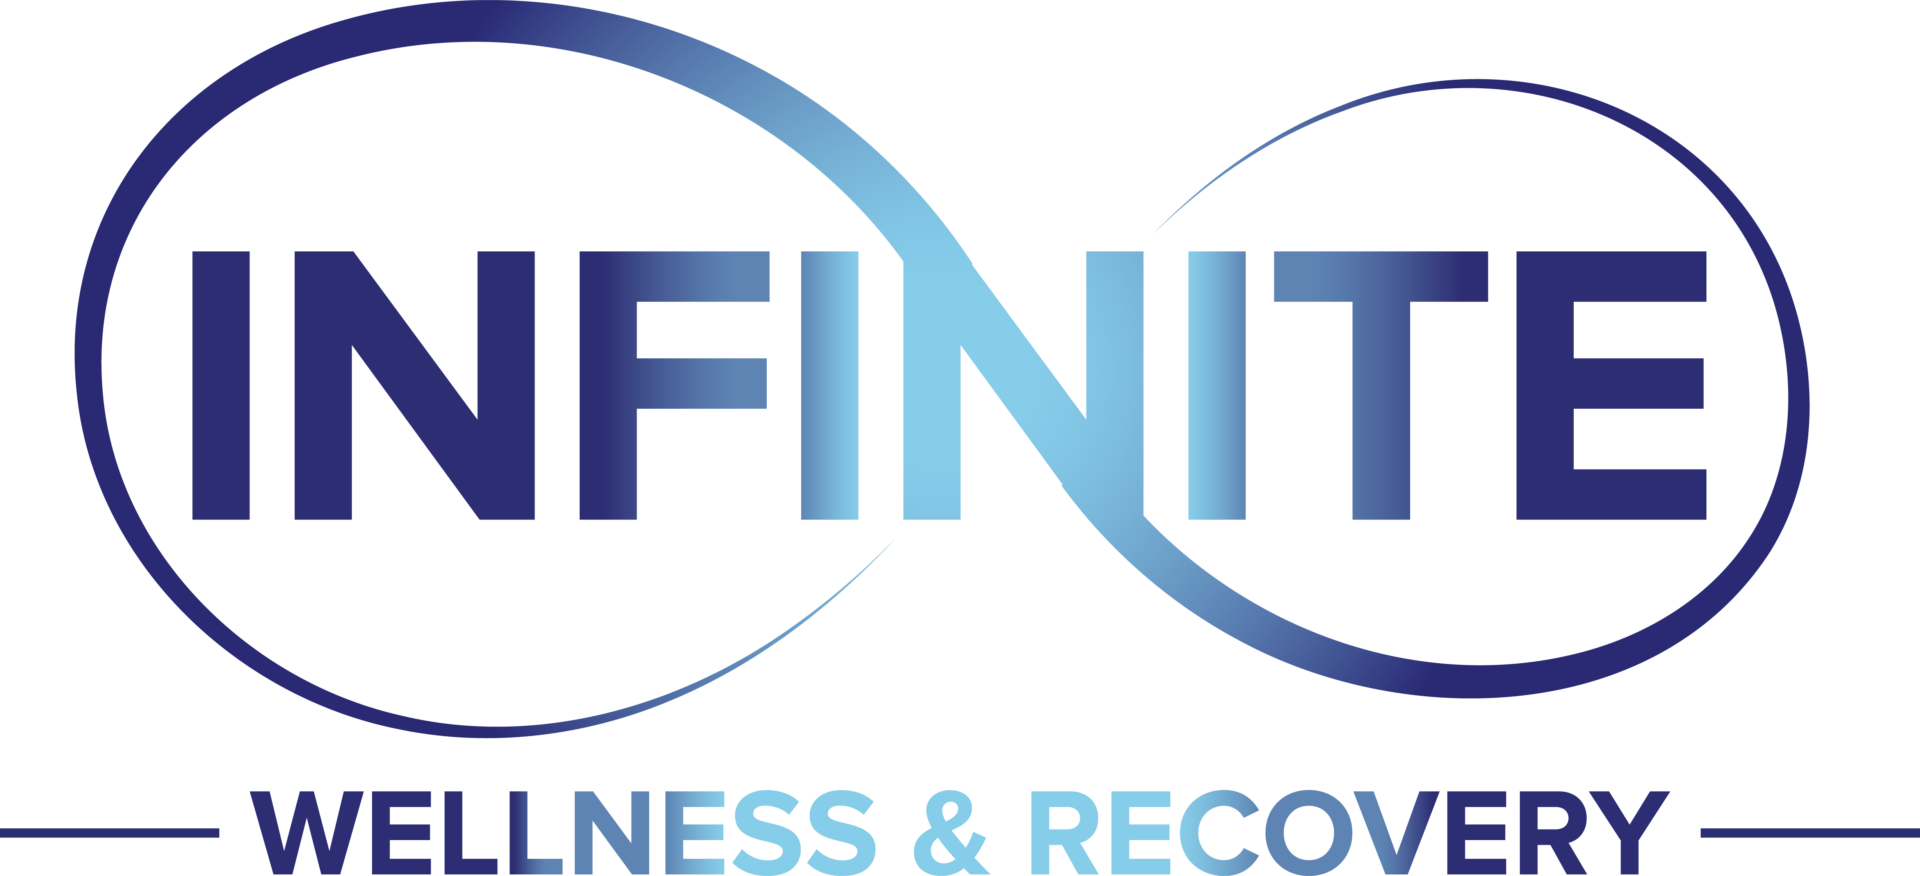 Infinite wellness and recovery logo in blue color